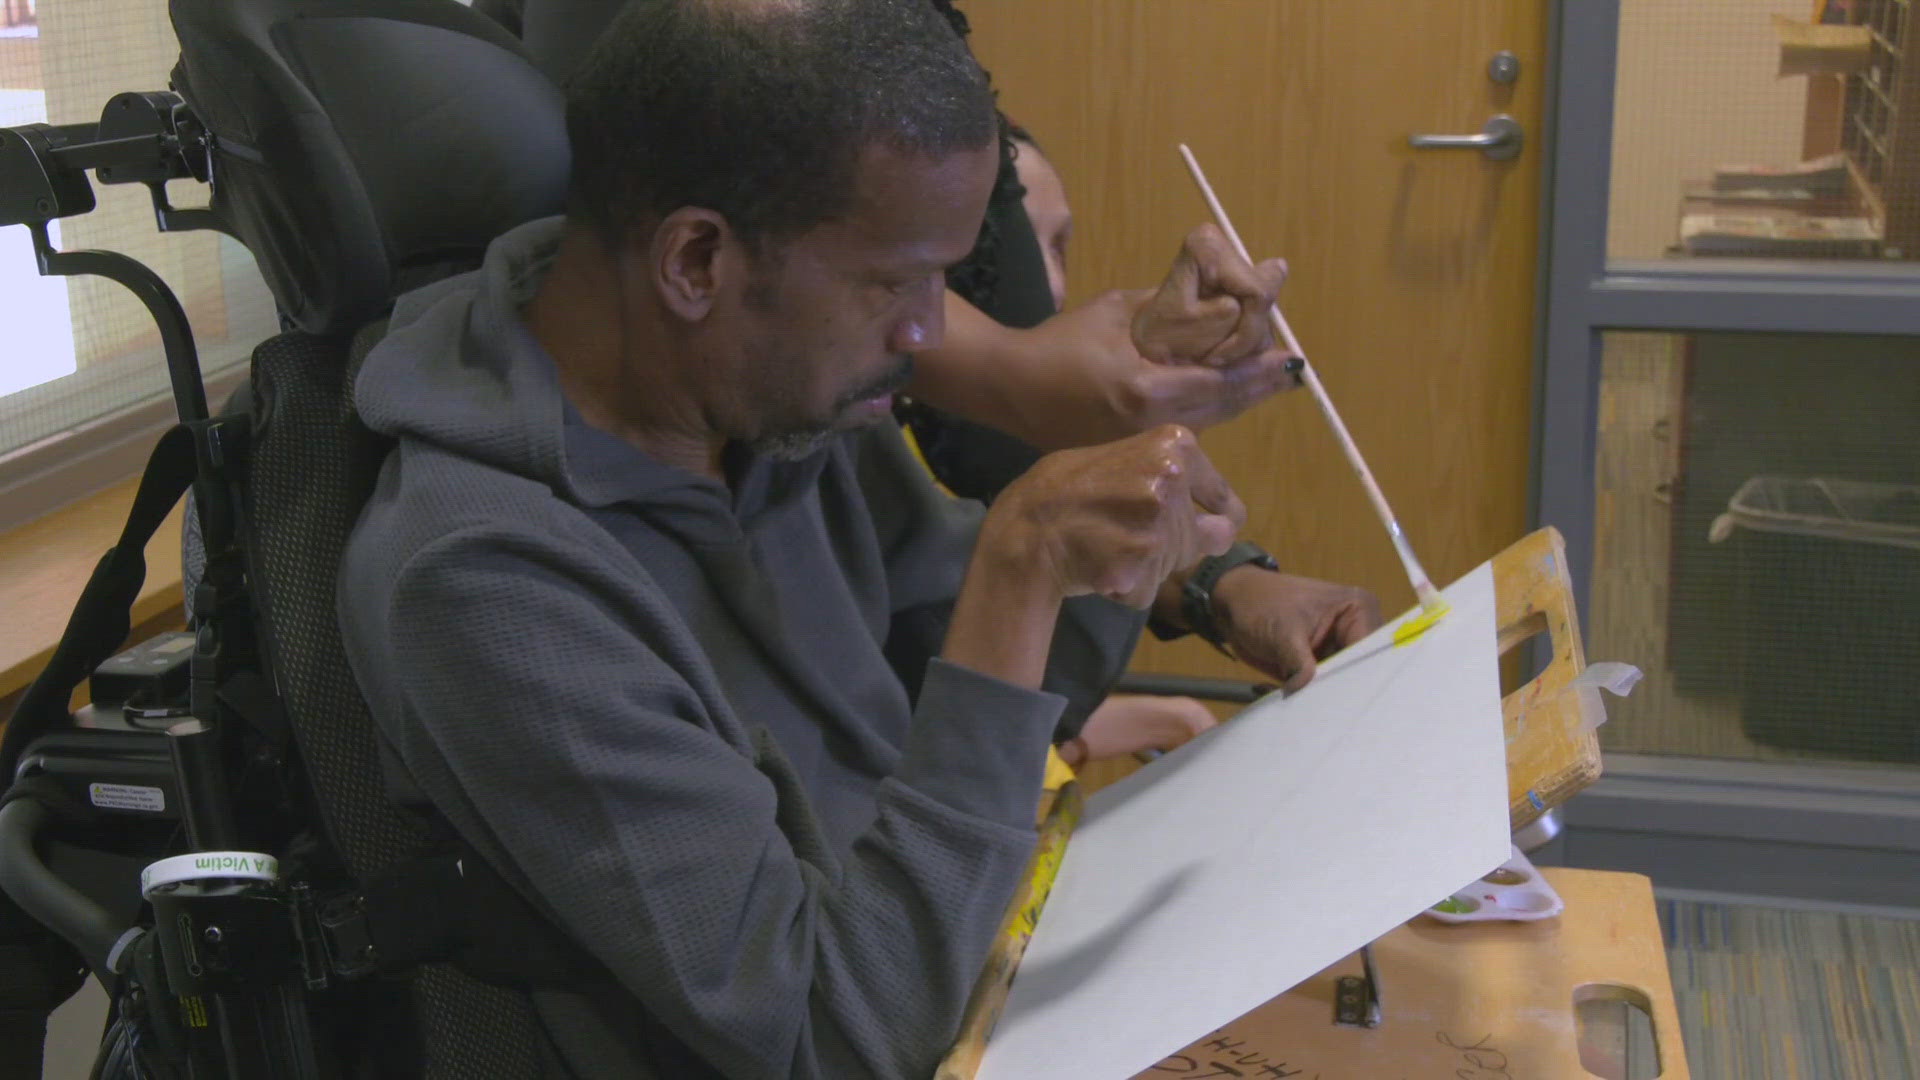 Tyrone Peacock is an artist with cerebral palsy. His artwork has been shared around the world.